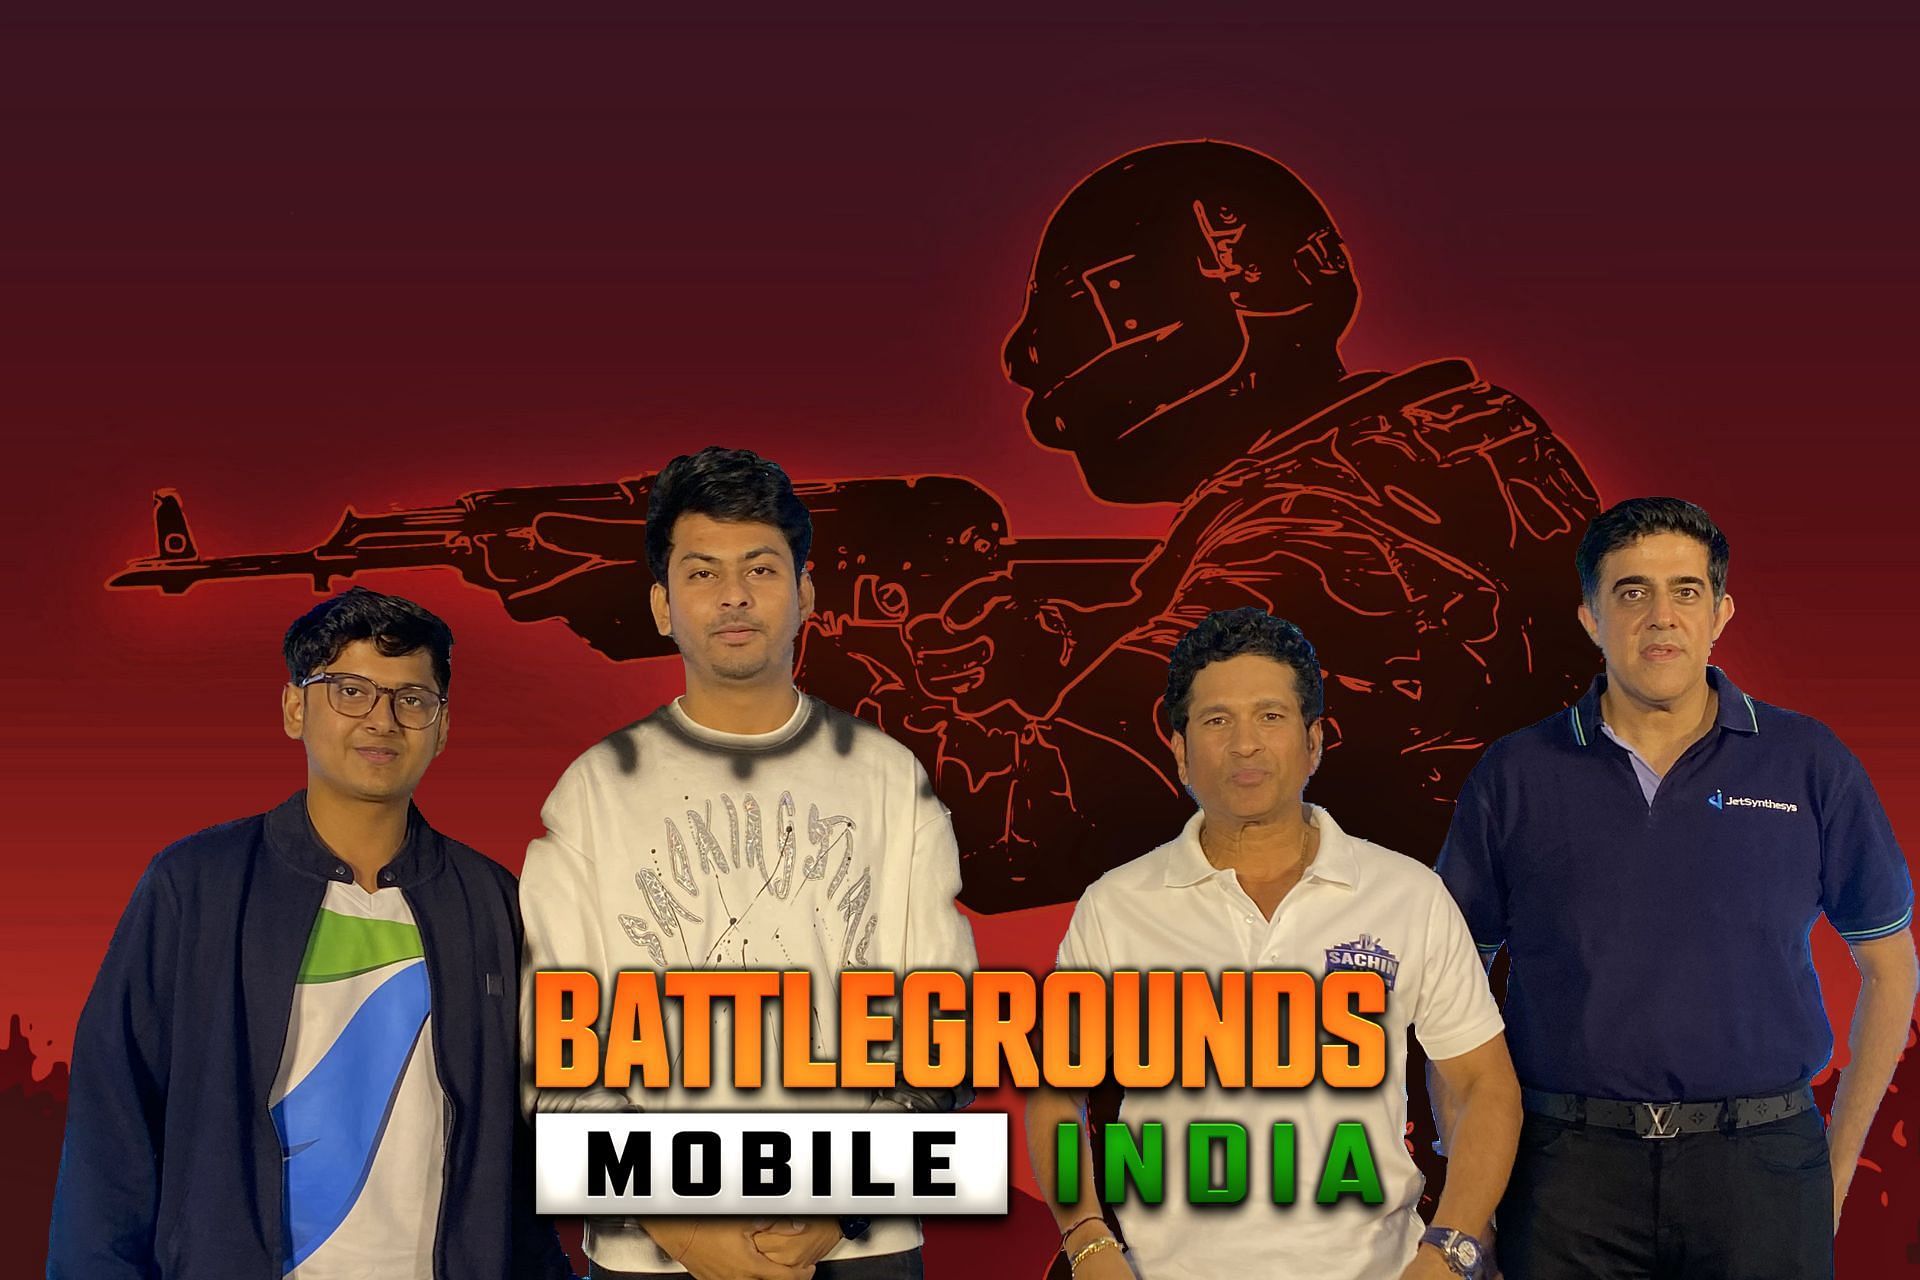 Sachin Tendulkar posed with popular BGMI gamers and the CEO of JetSynthesys (Image vis Sportskeeda)